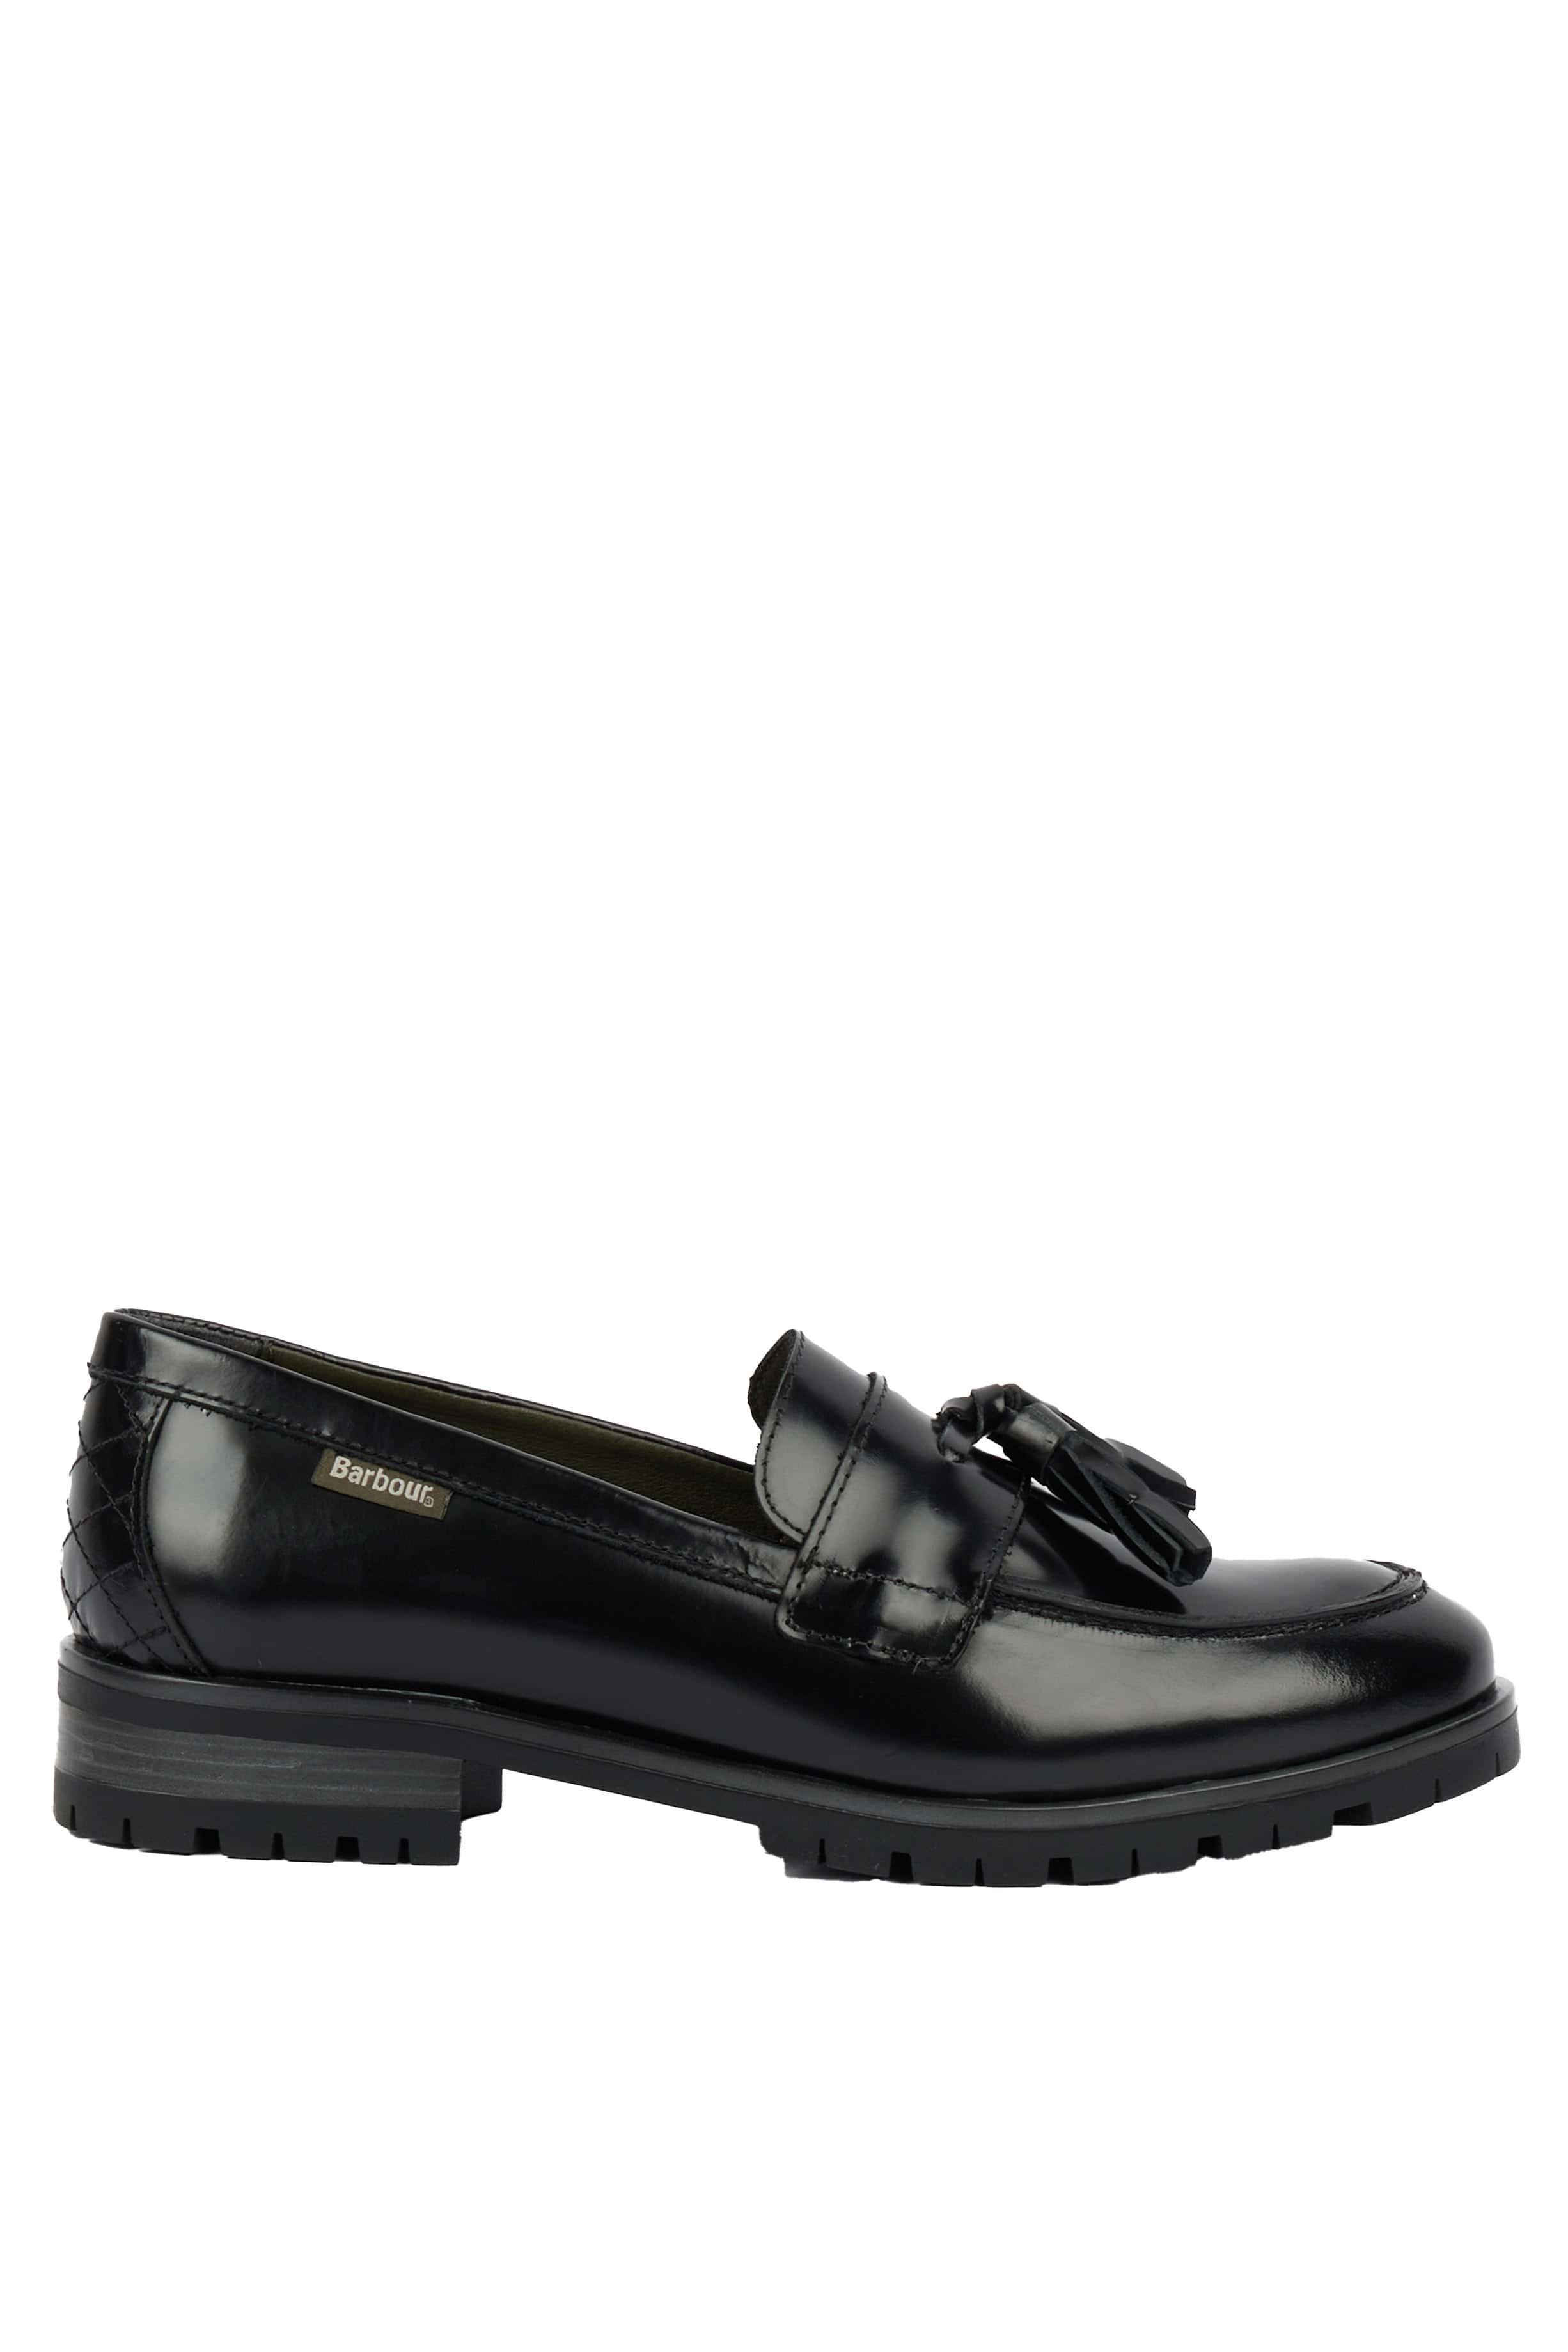 Barbour Bex Loafers - Black